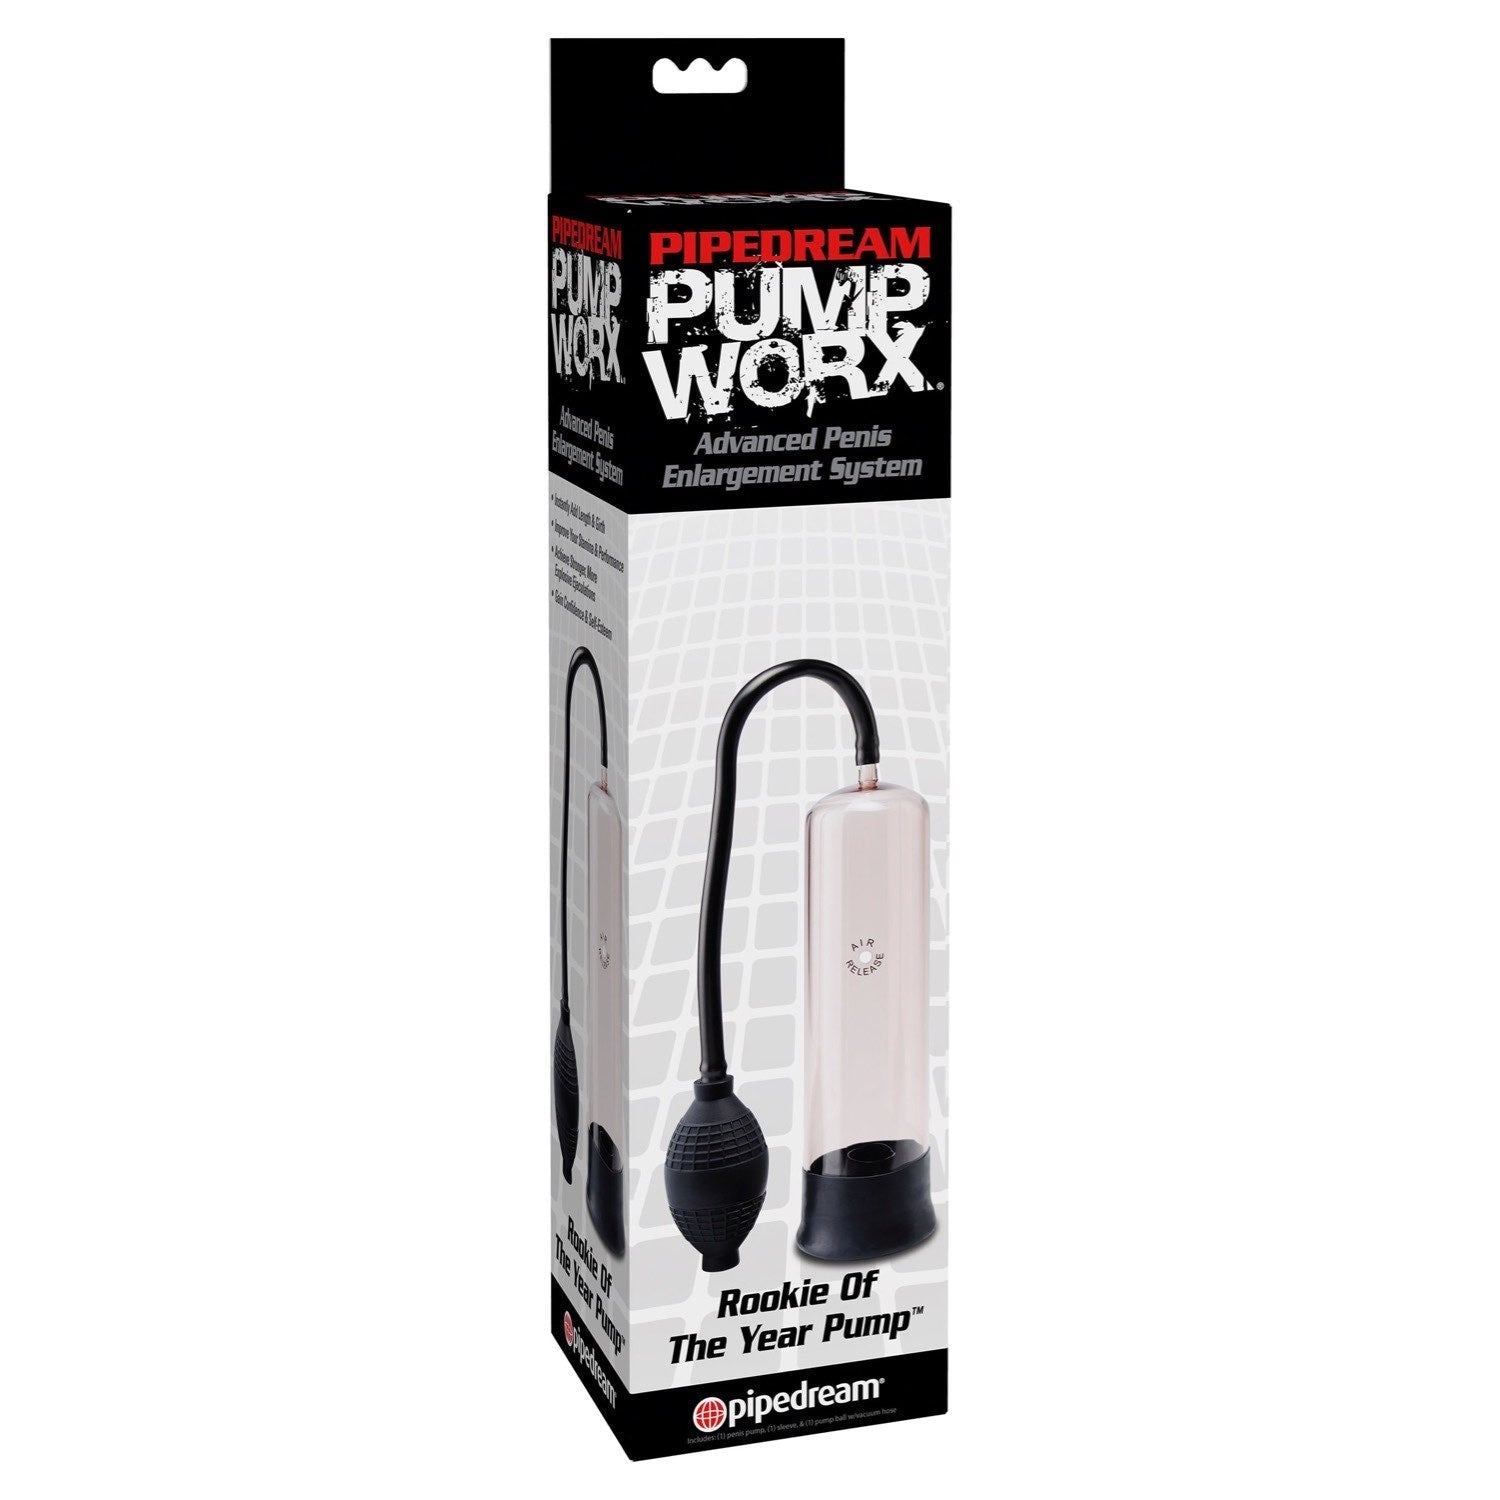 Pump Worx Rookie Of The Year Pump - Clear/Black Penis Pump by Pipedream